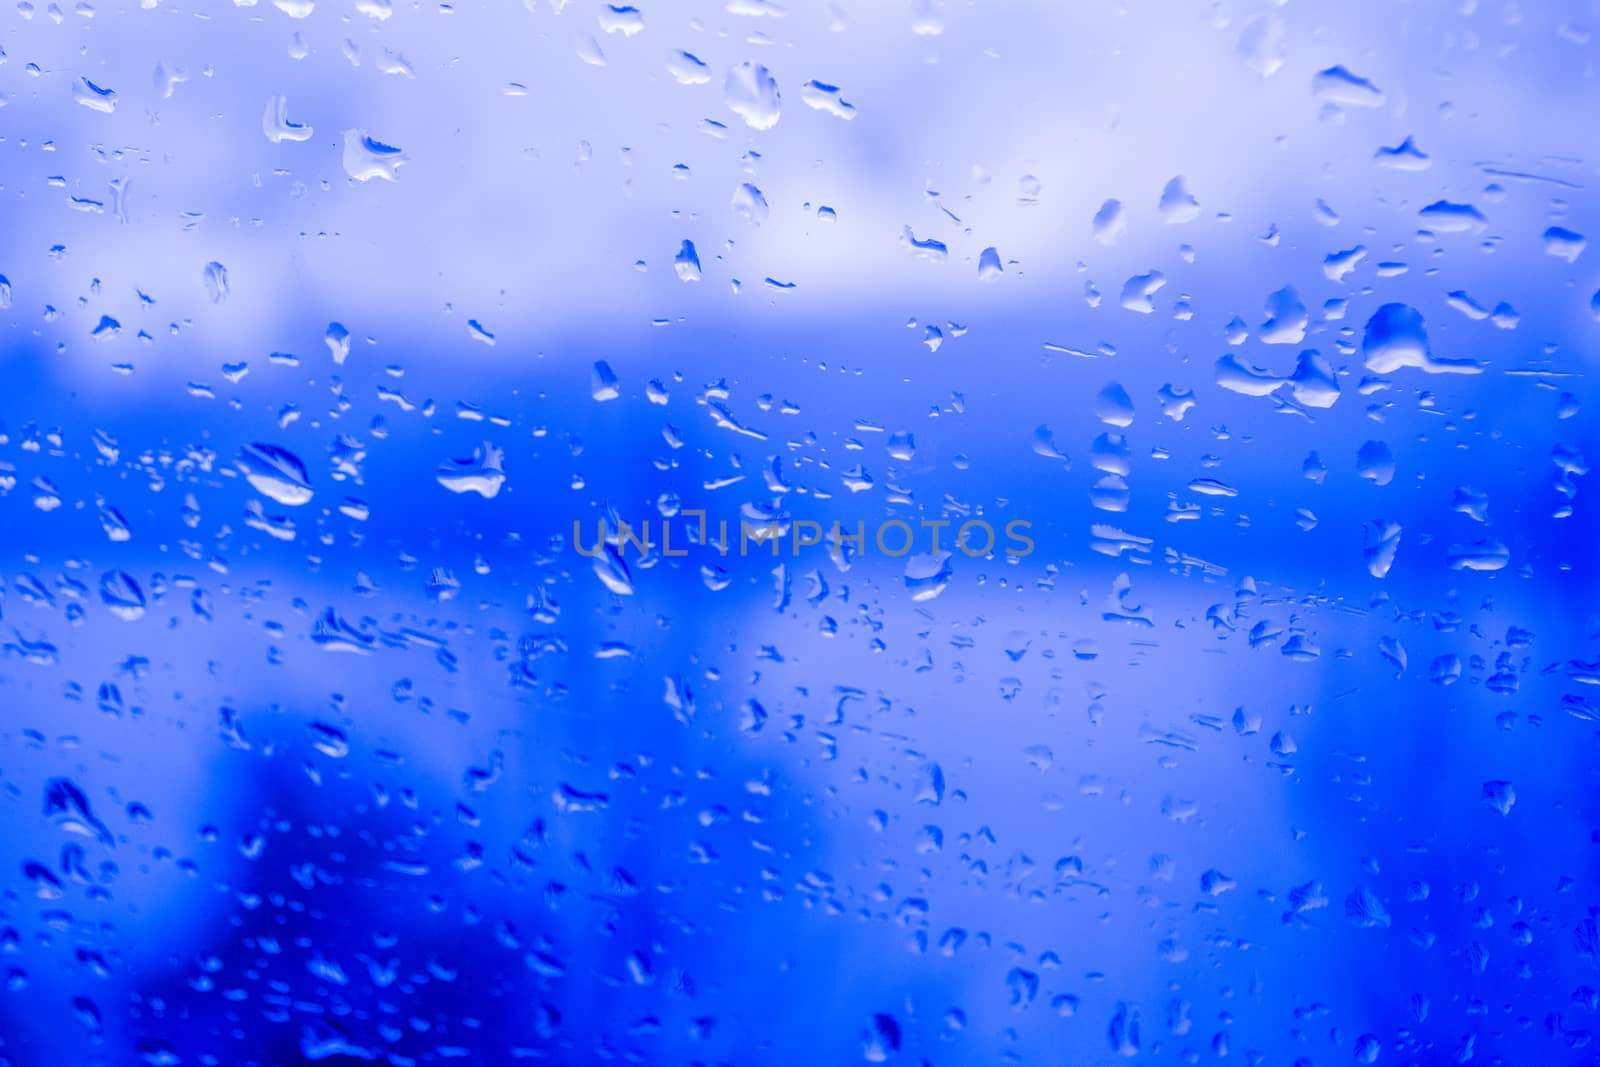 Raindrops on a window, illustrating gray and rainy weather during the day. Blue background. by kb79